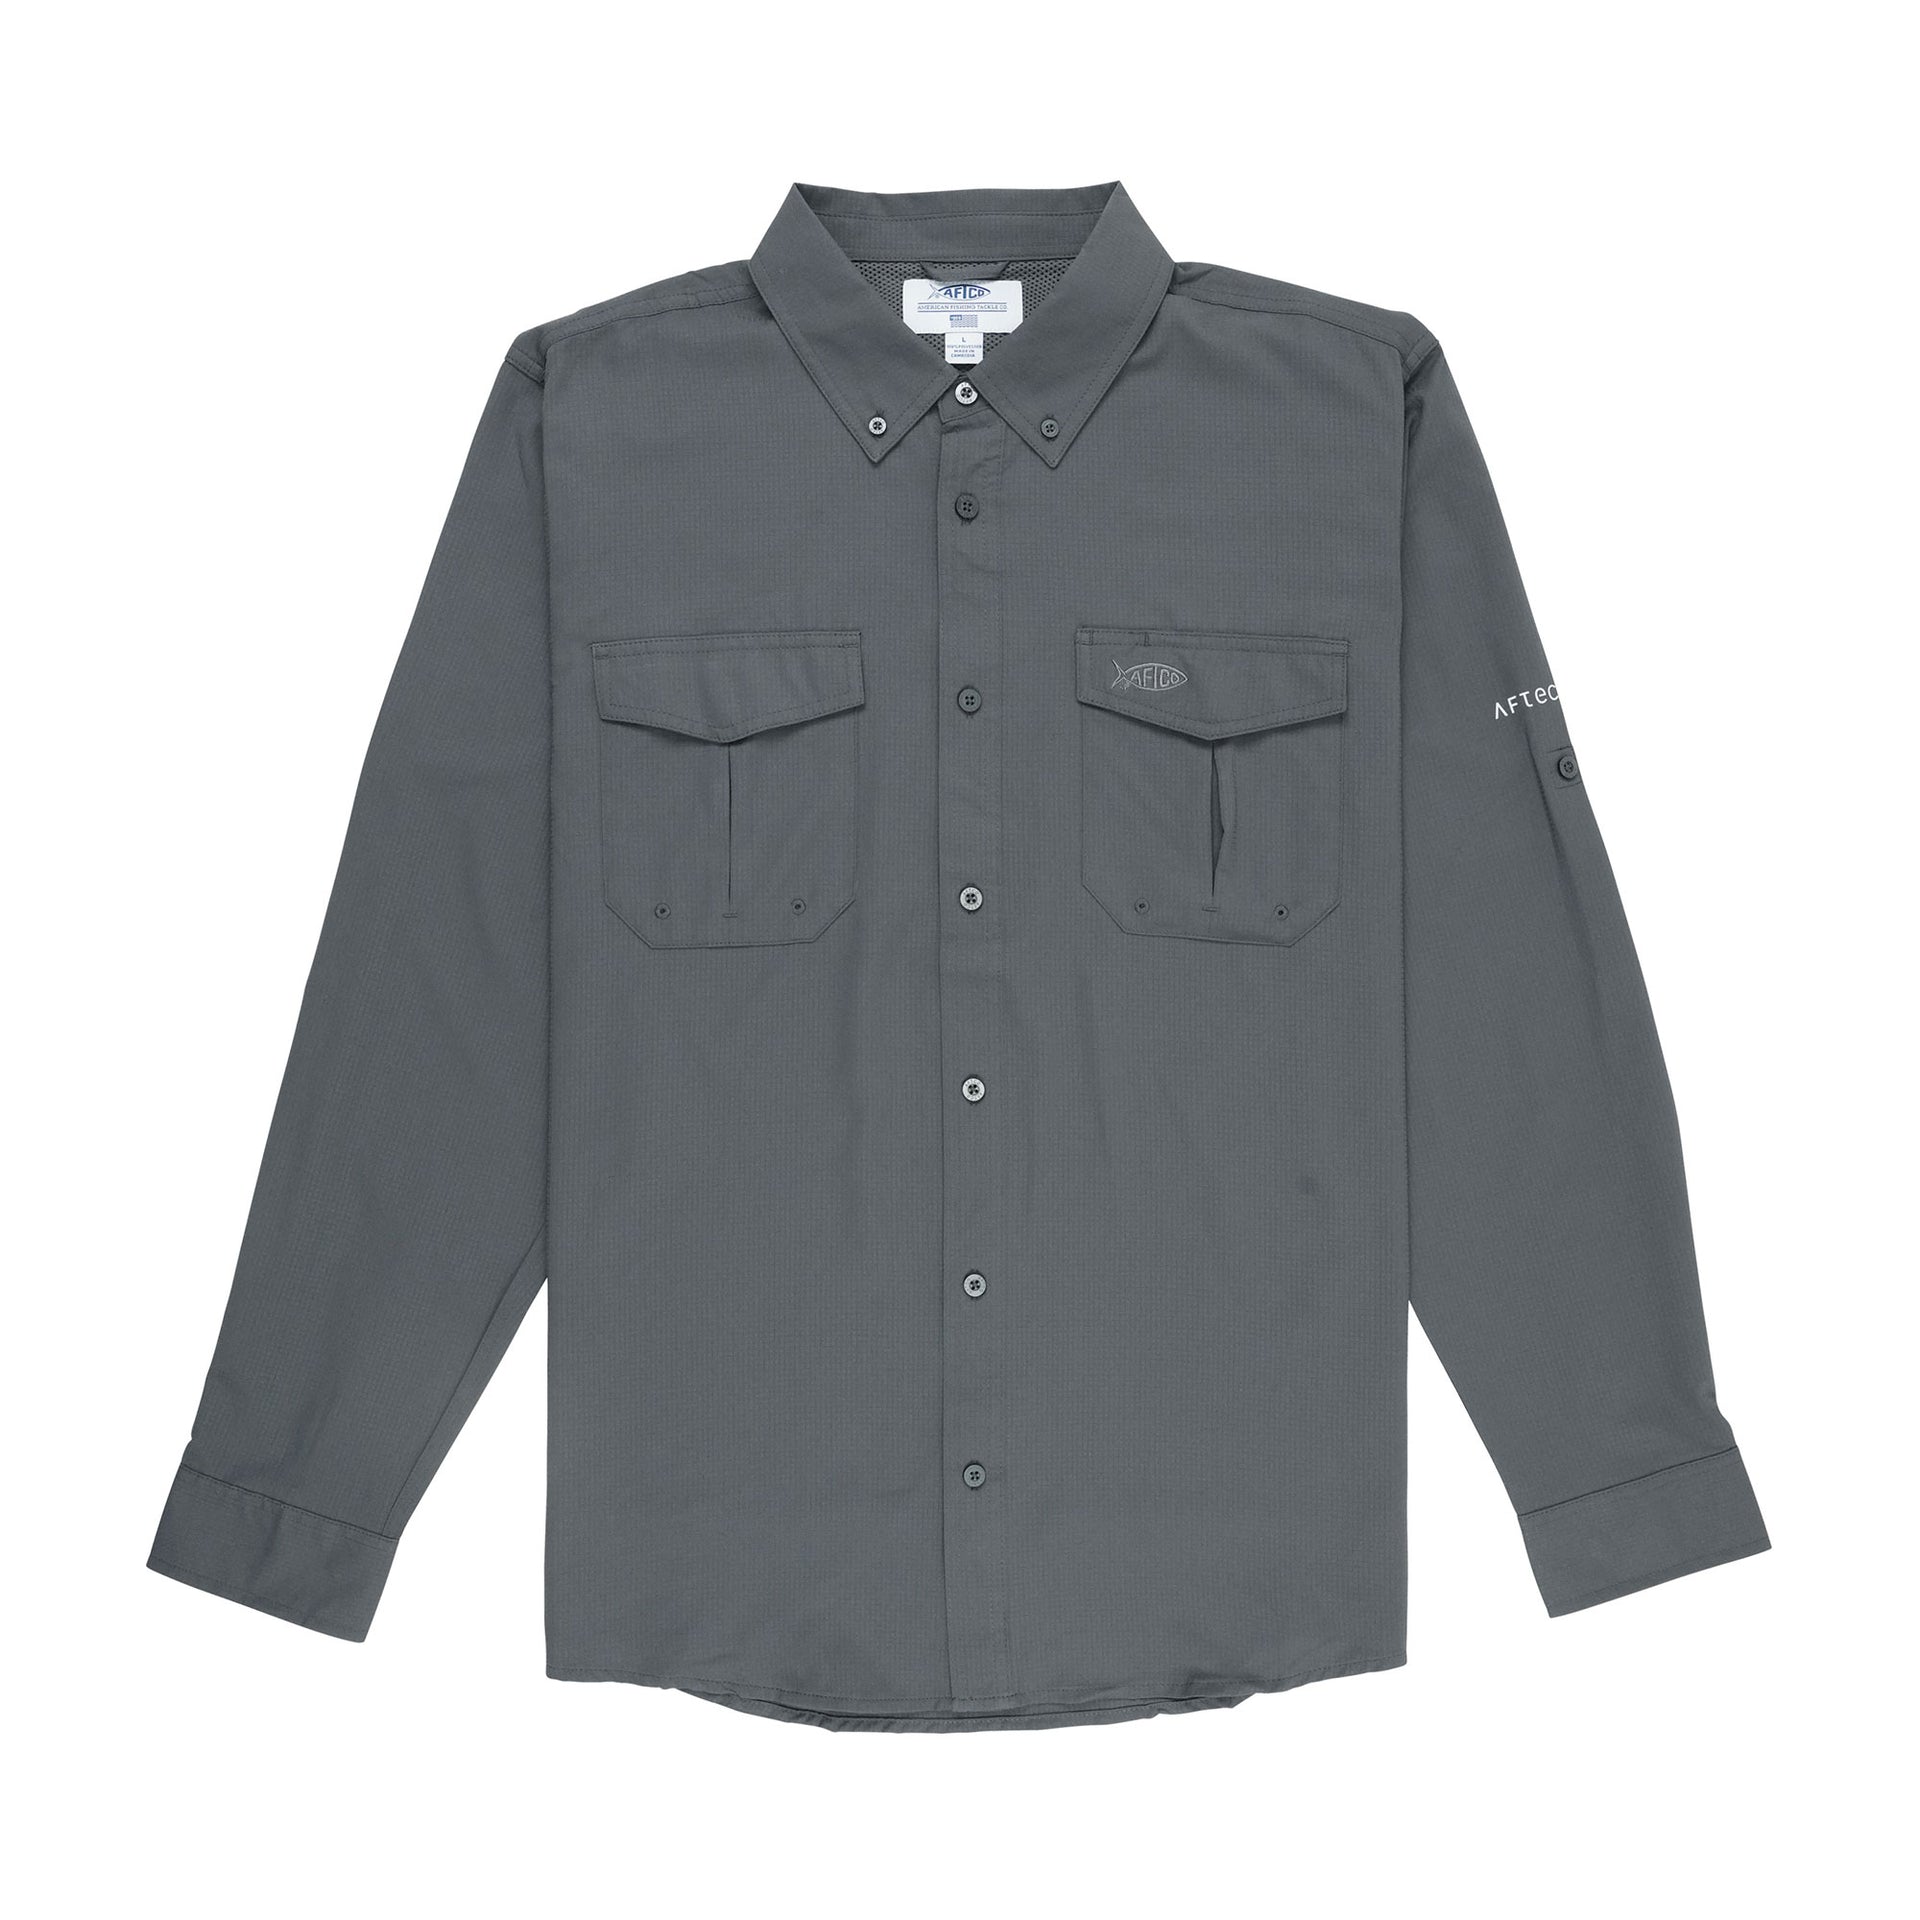 Rangle Vented Long Sleeve Shirt | AFTCO / Charcoal / XL